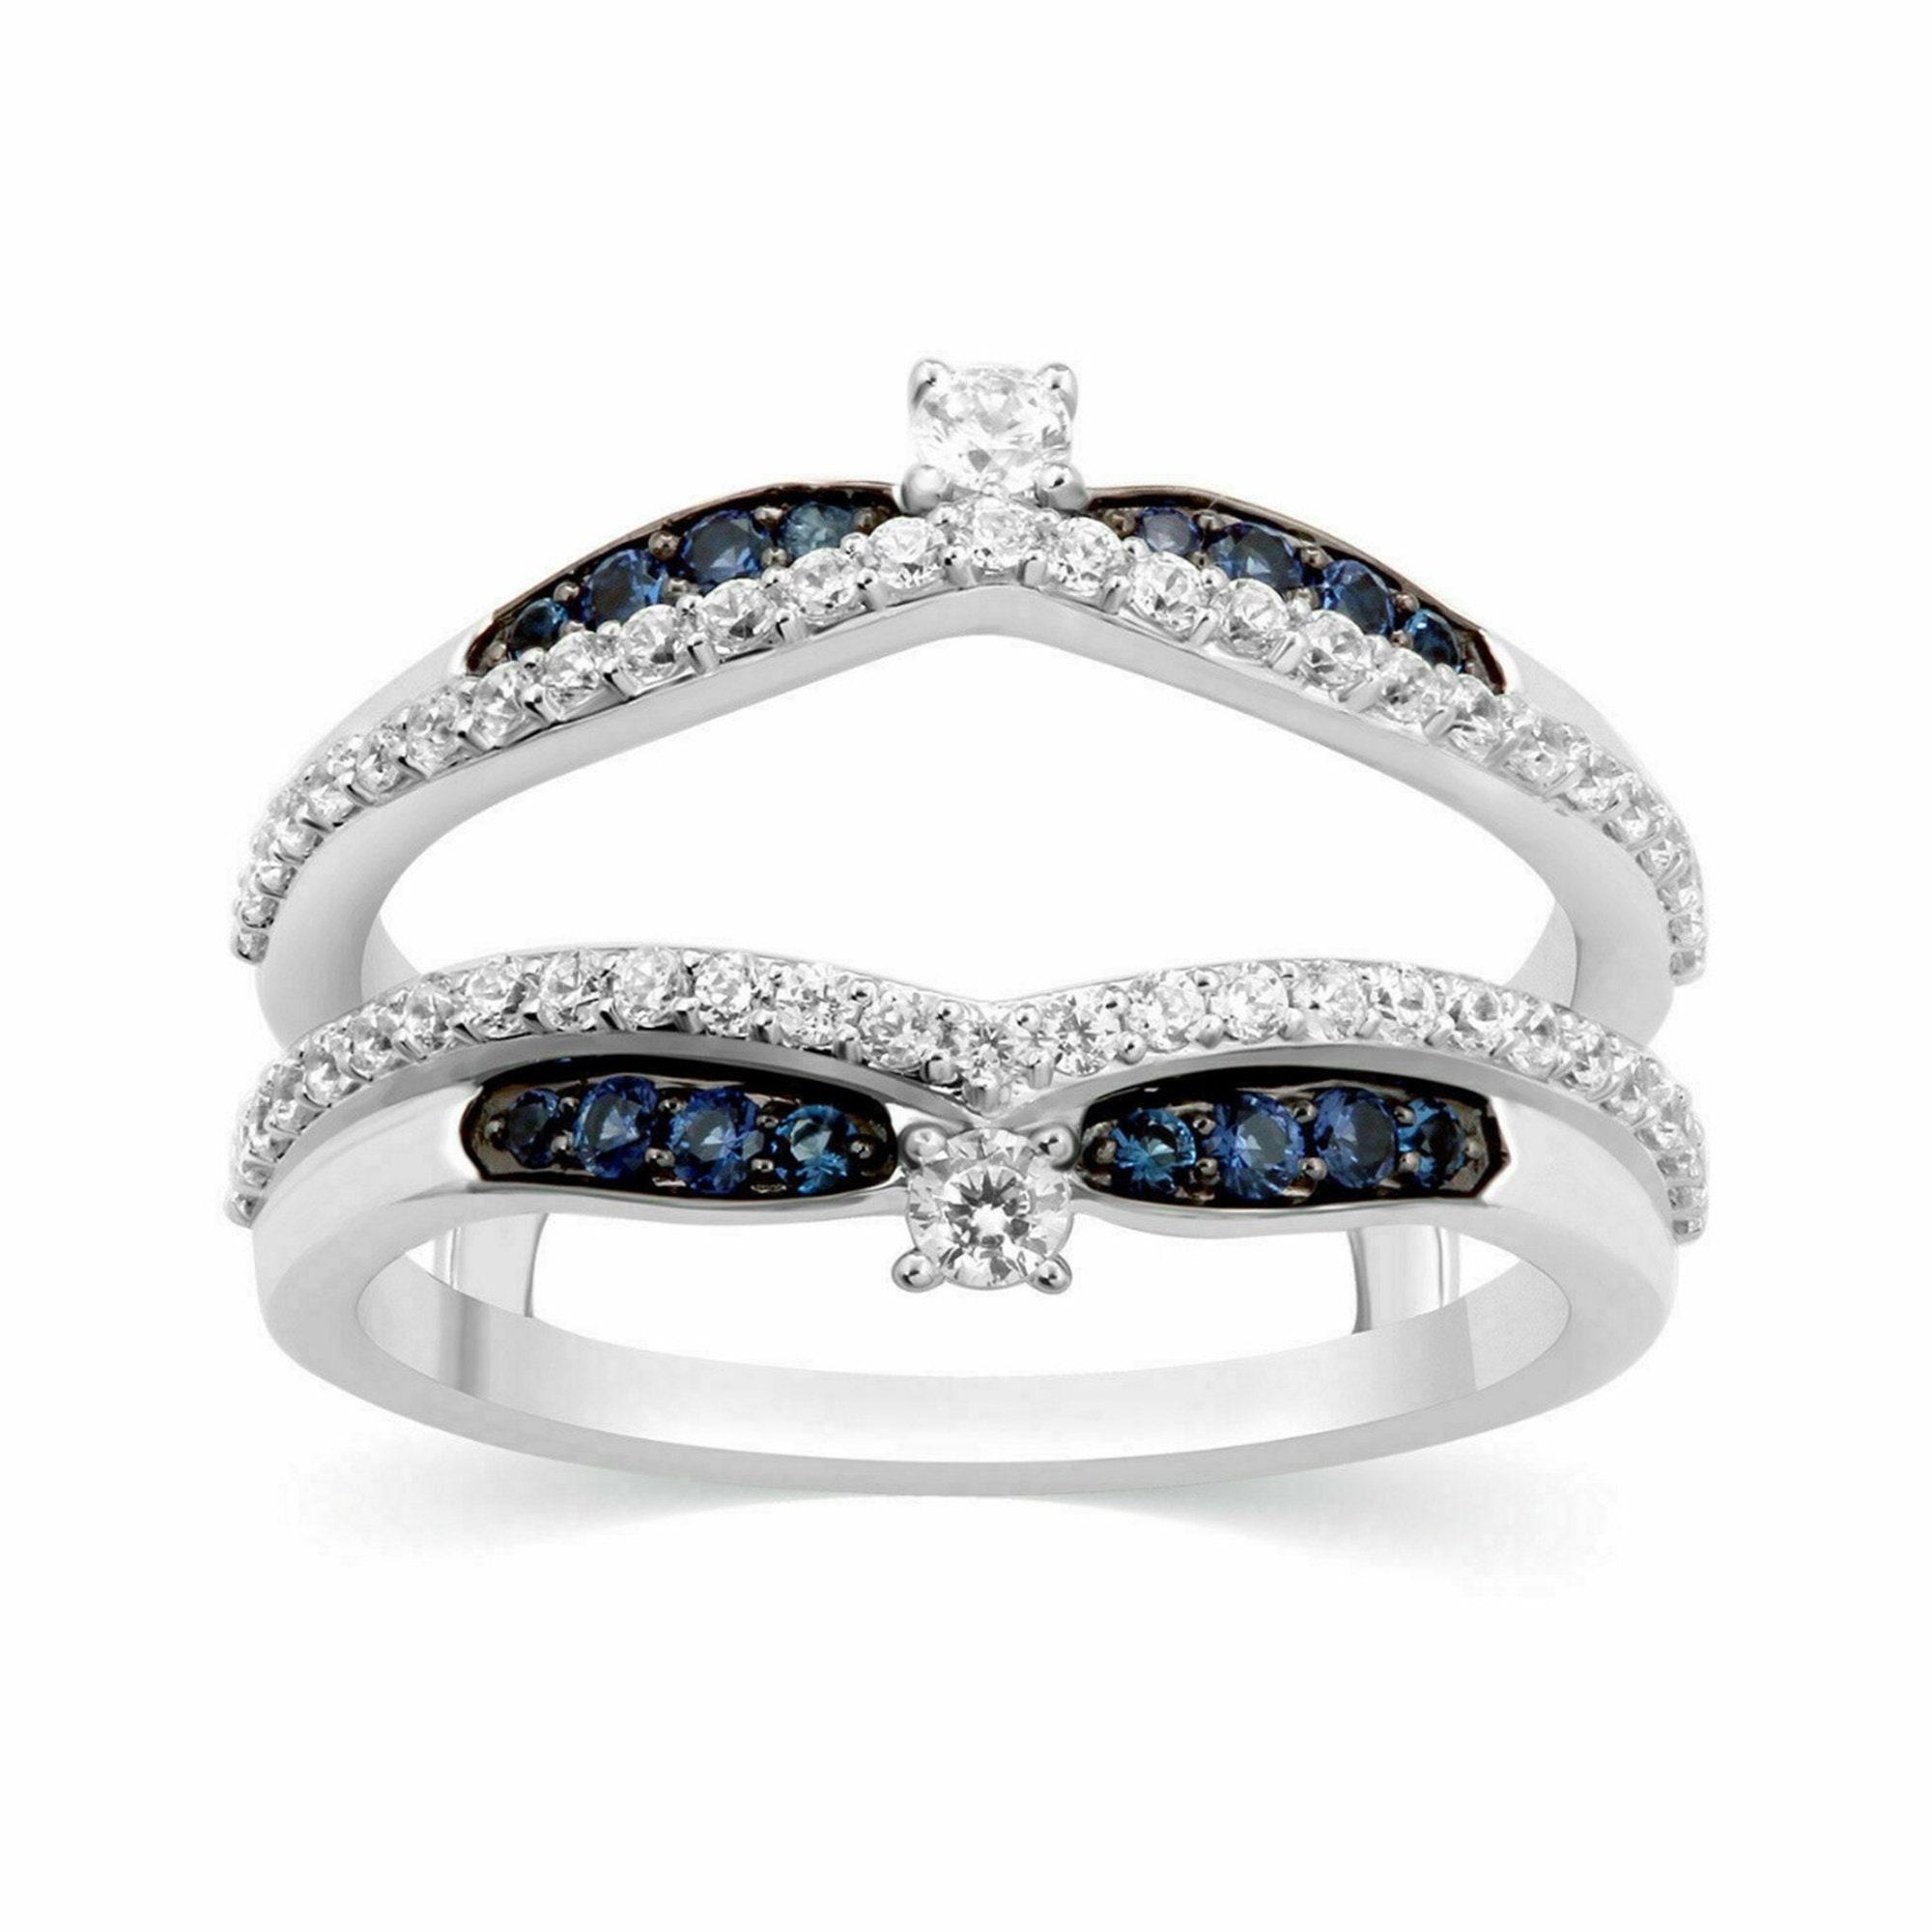 Dazzlingrock Collection Round Blue Sapphire and White Diamond Wedding Ring  Guard Wrap Enhancer Band For Women in 18K Yellow Gold, Size 7.5 